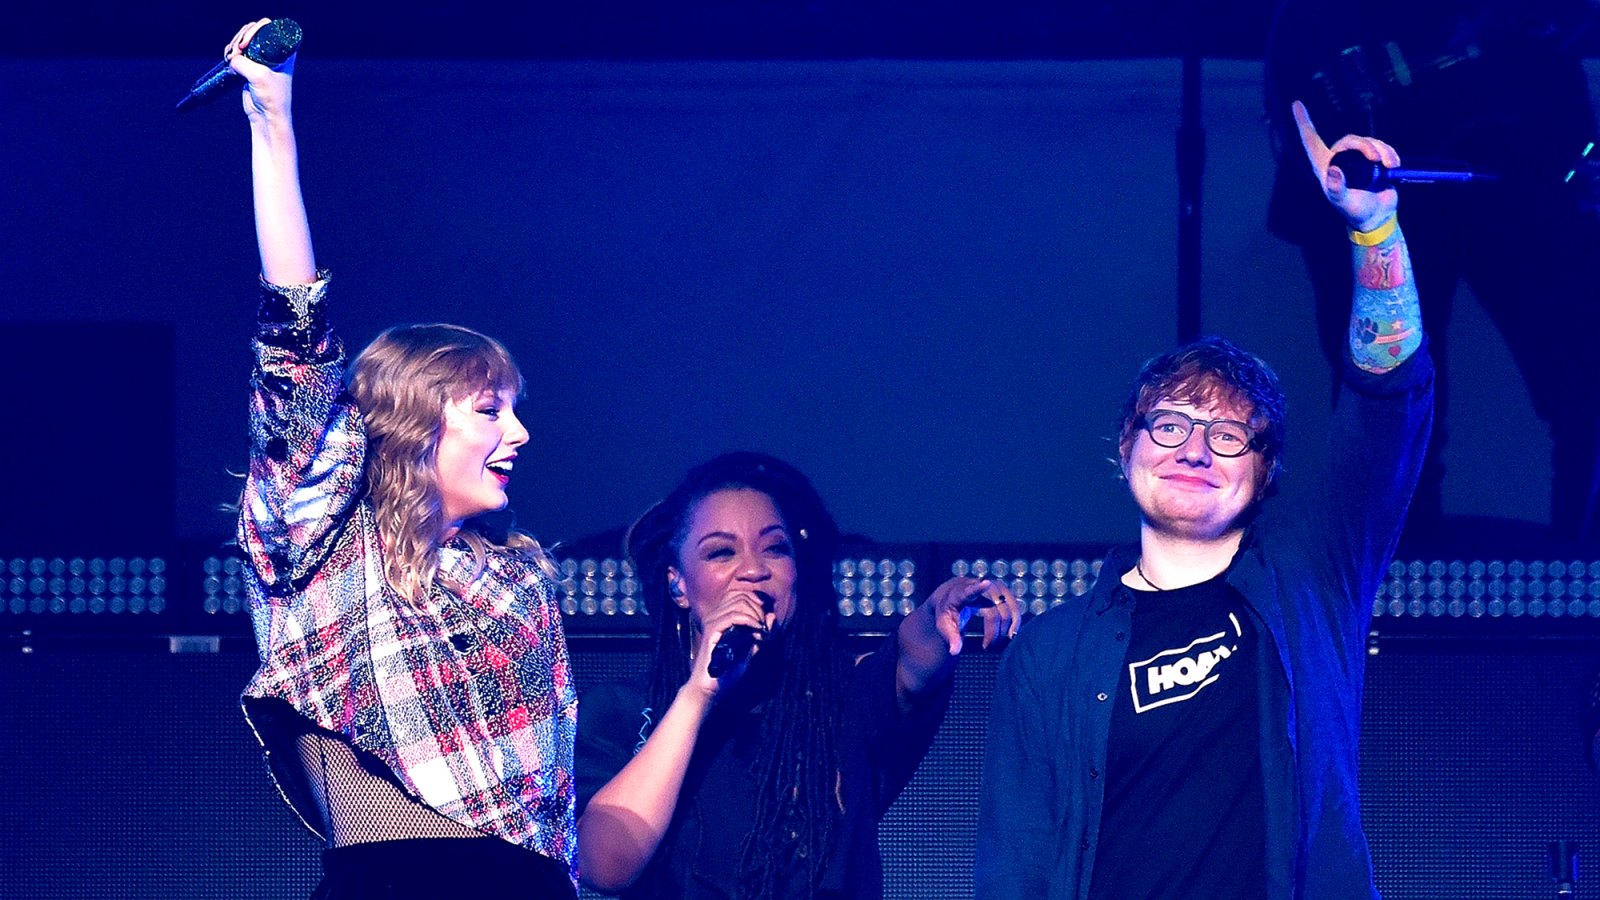 Ed Sheeran joins Taylor Swift onstage during the 99.7 NOW! POPTOPIA 2017 at SAP Center in San Jose, California.